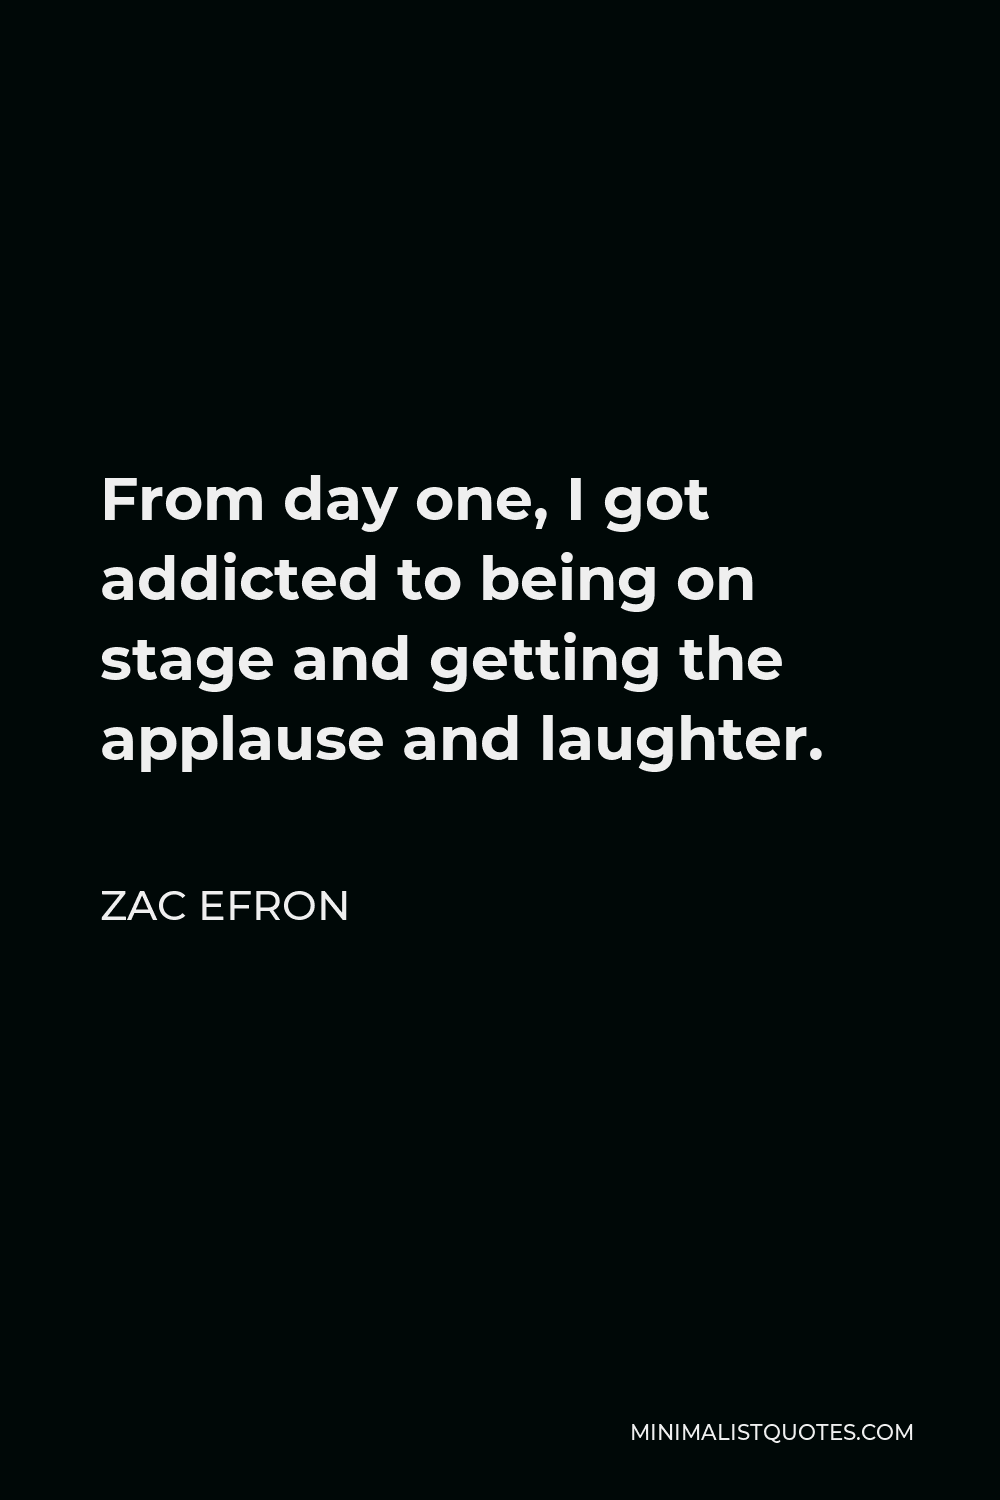 Zac Efron Quote - From day one, I got addicted to being on stage and getting the applause and laughter.